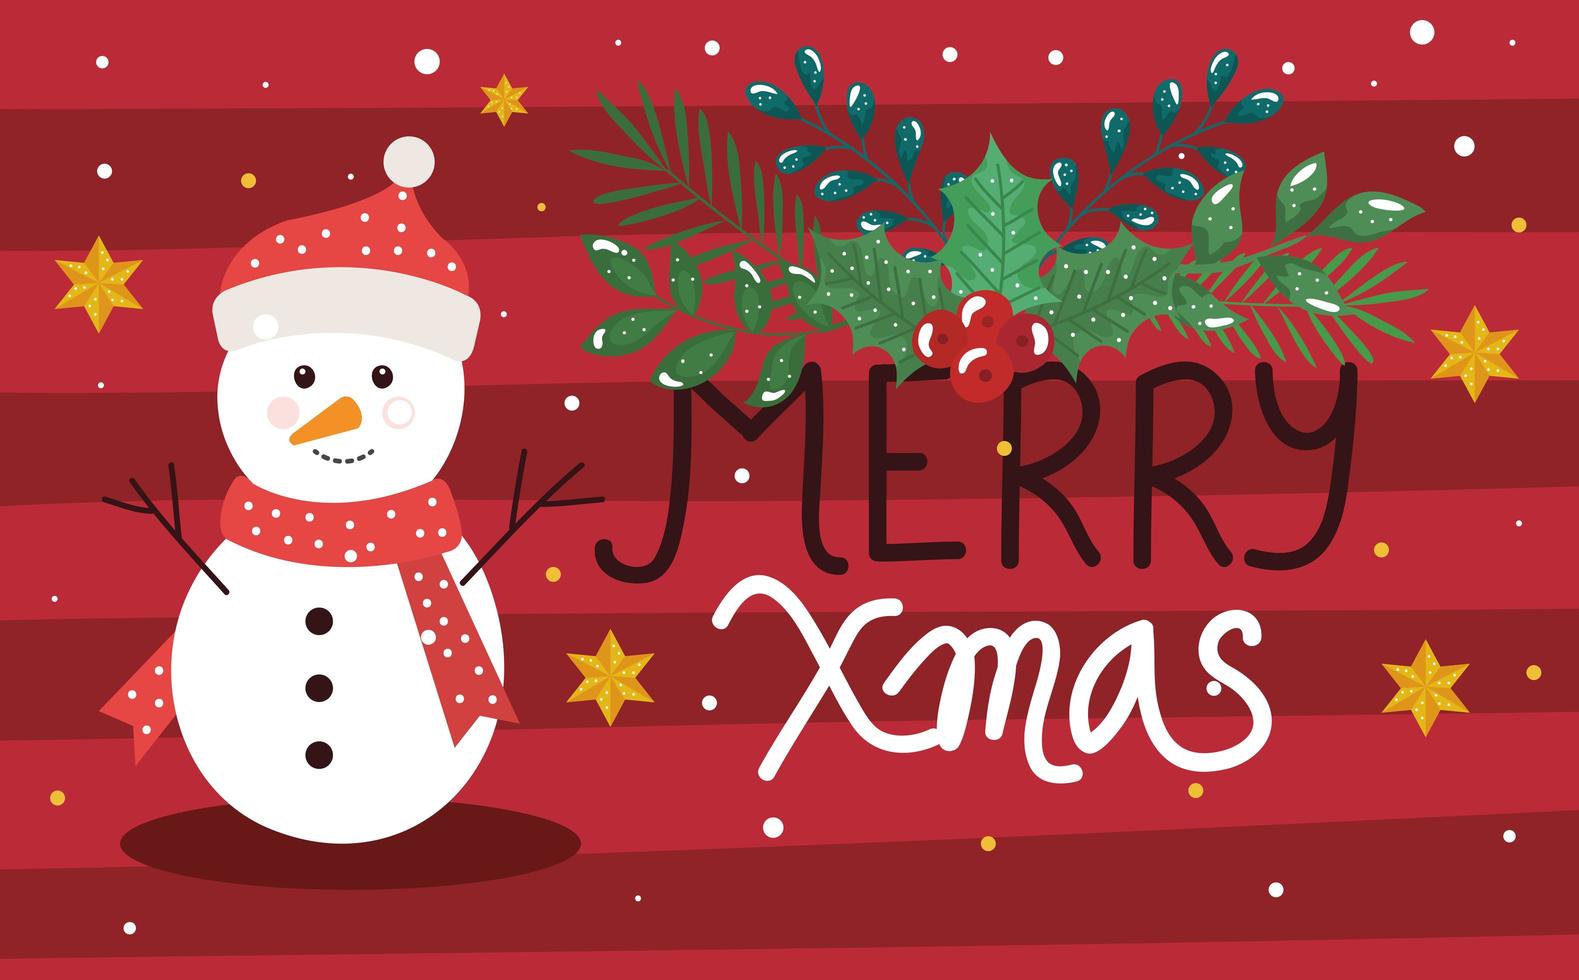 merry christmas poster with snowman and decoration vector